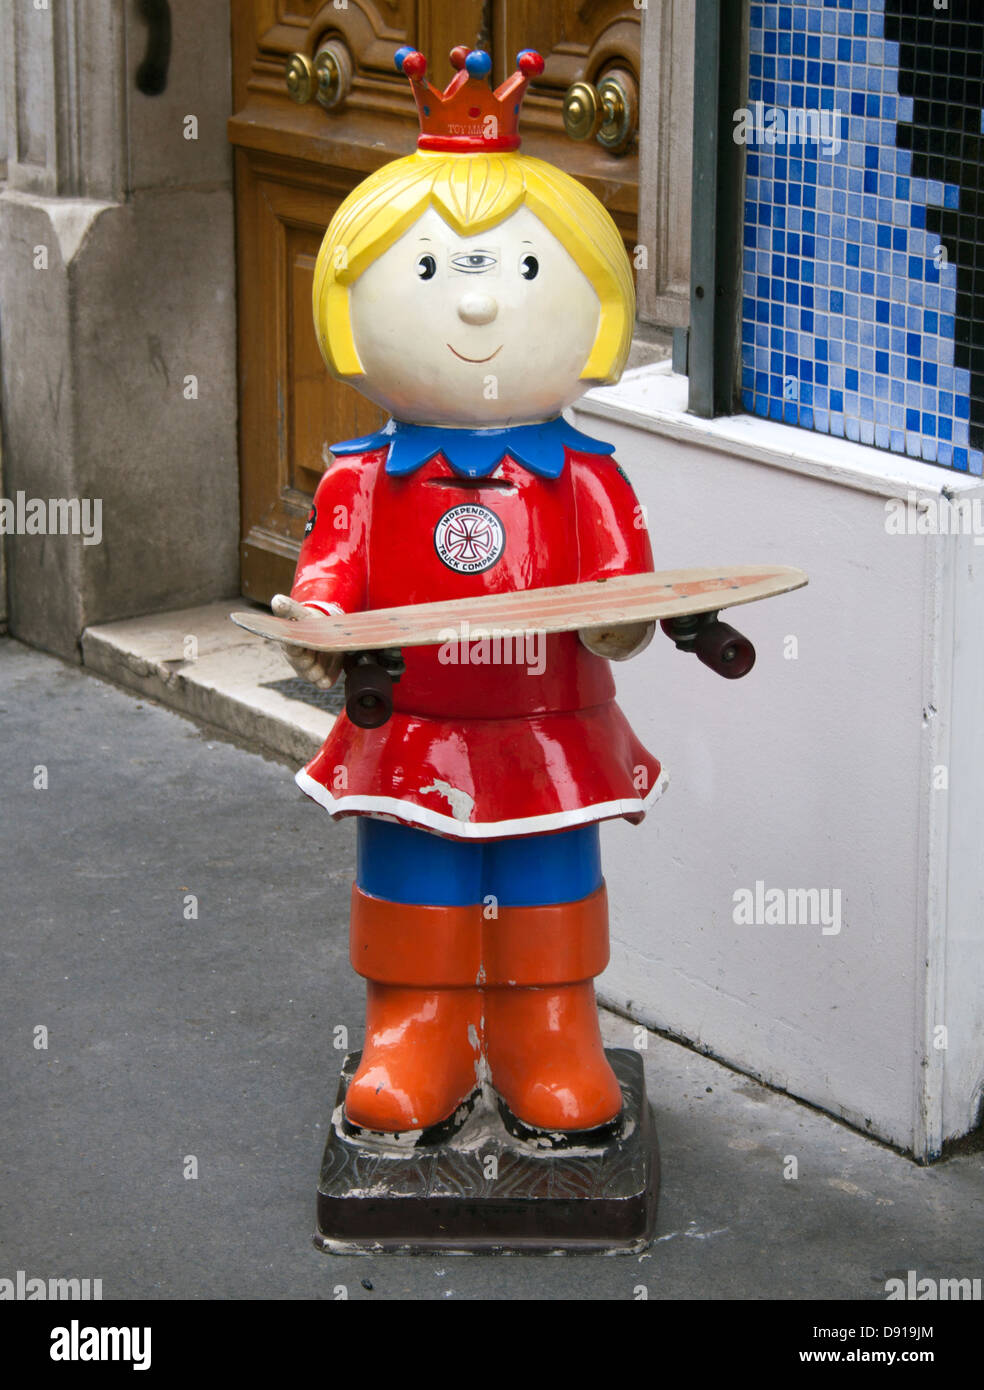 Princess Skateboard statue outside a store in Paris France Stock Photo